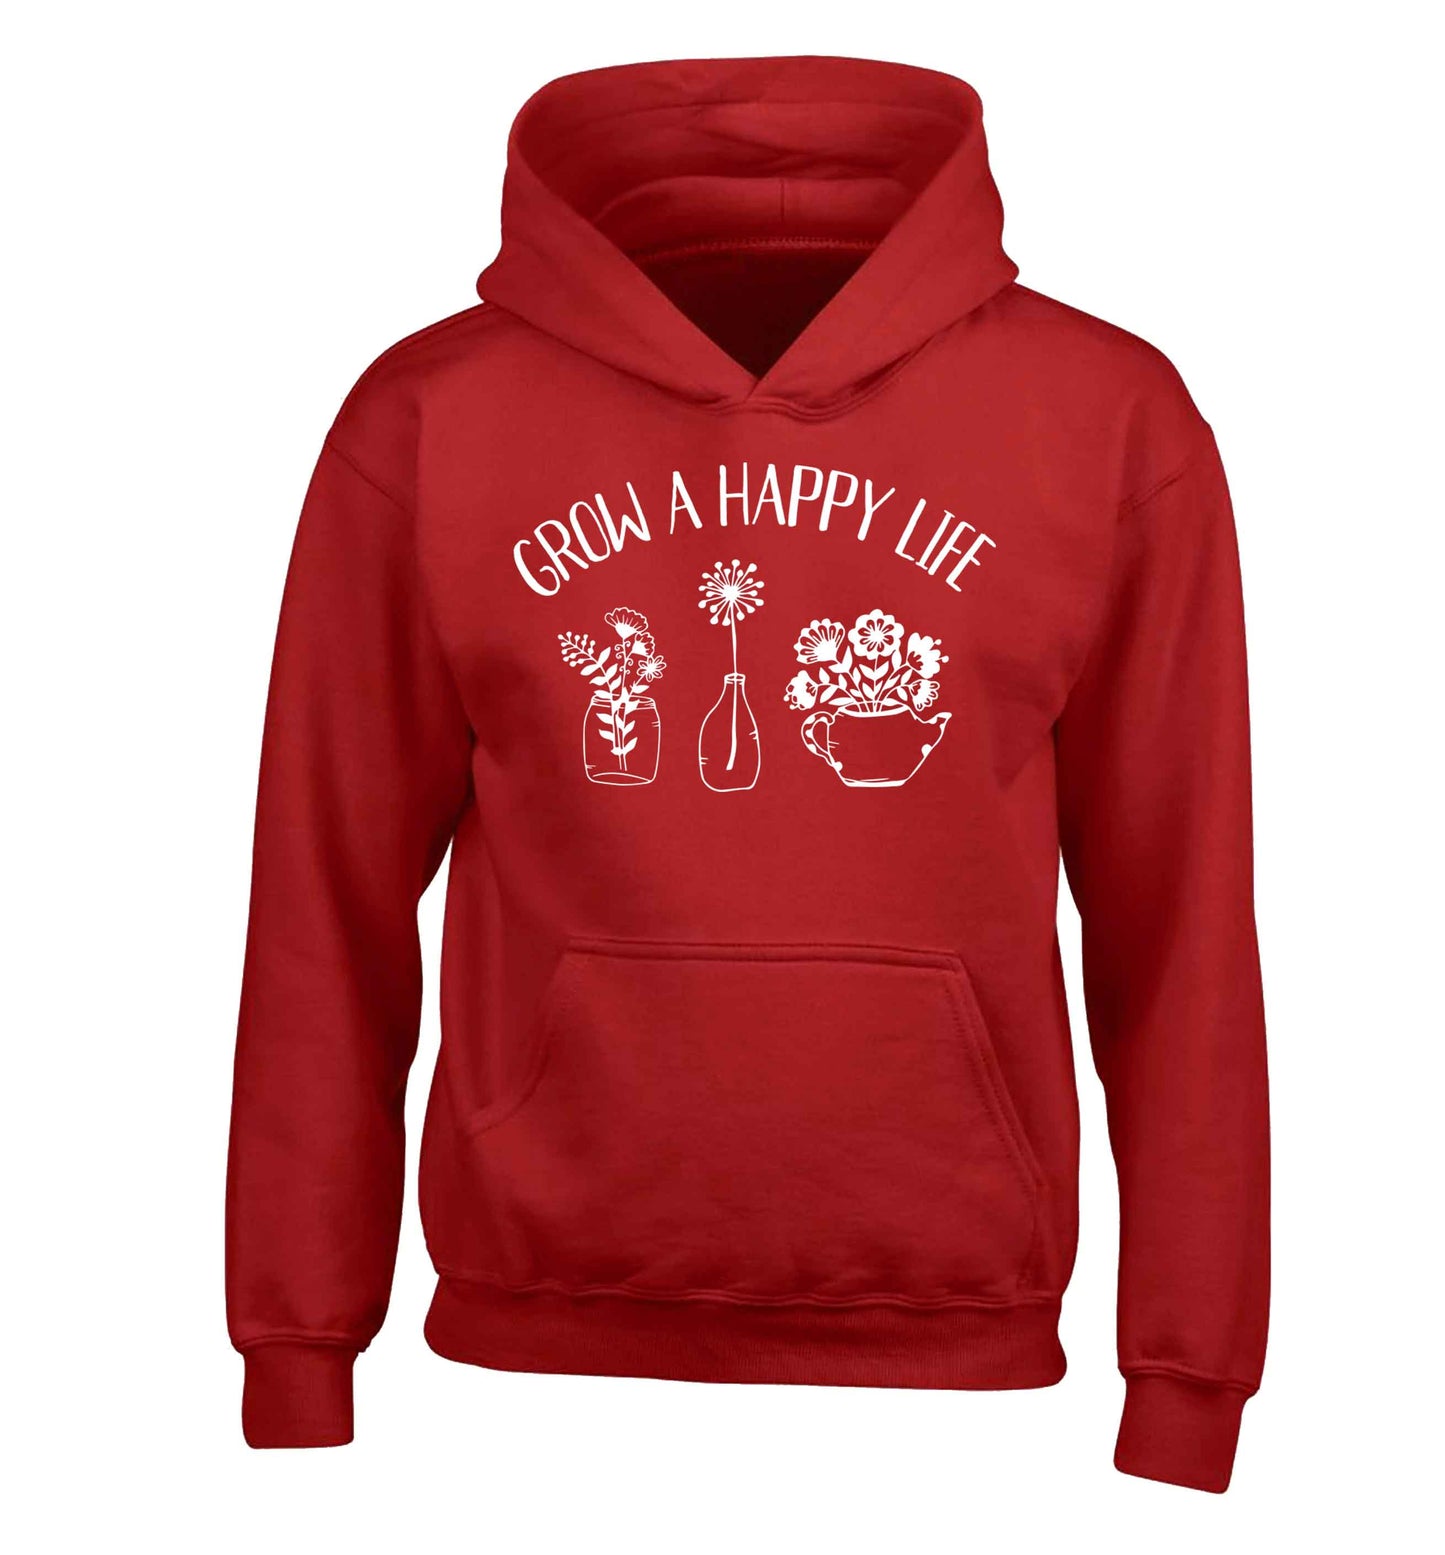 Grow a happy life children's red hoodie 12-13 Years